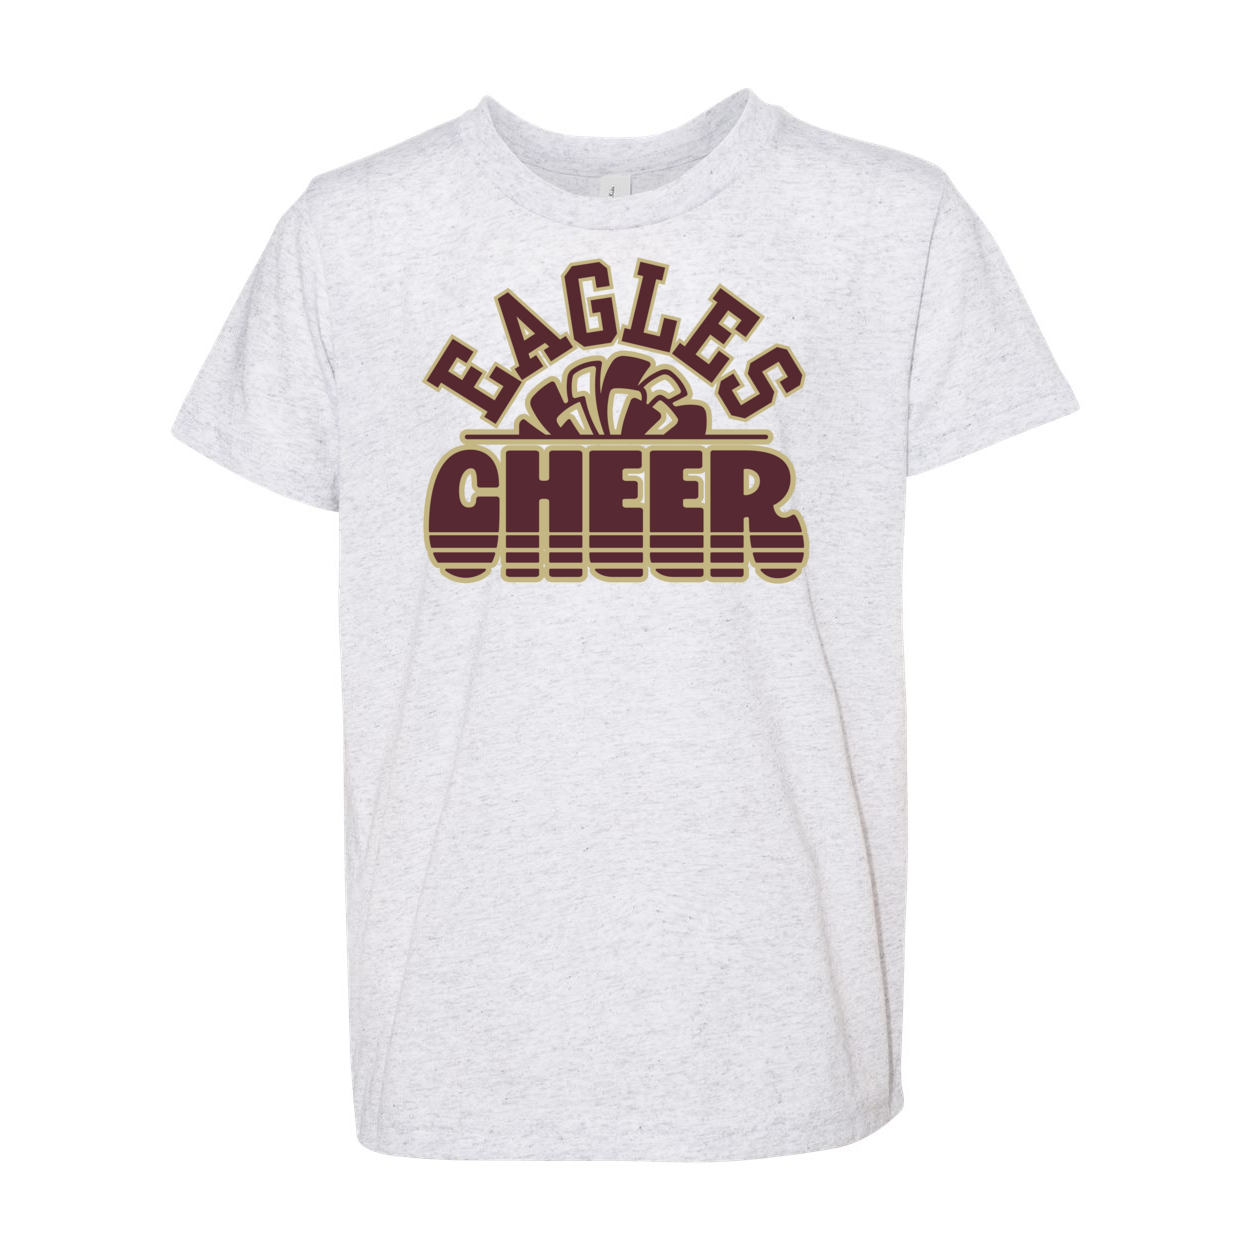 Youth Super Soft Eagles Cheer Short Sleeve Graphic Tee - New Albany Eagles